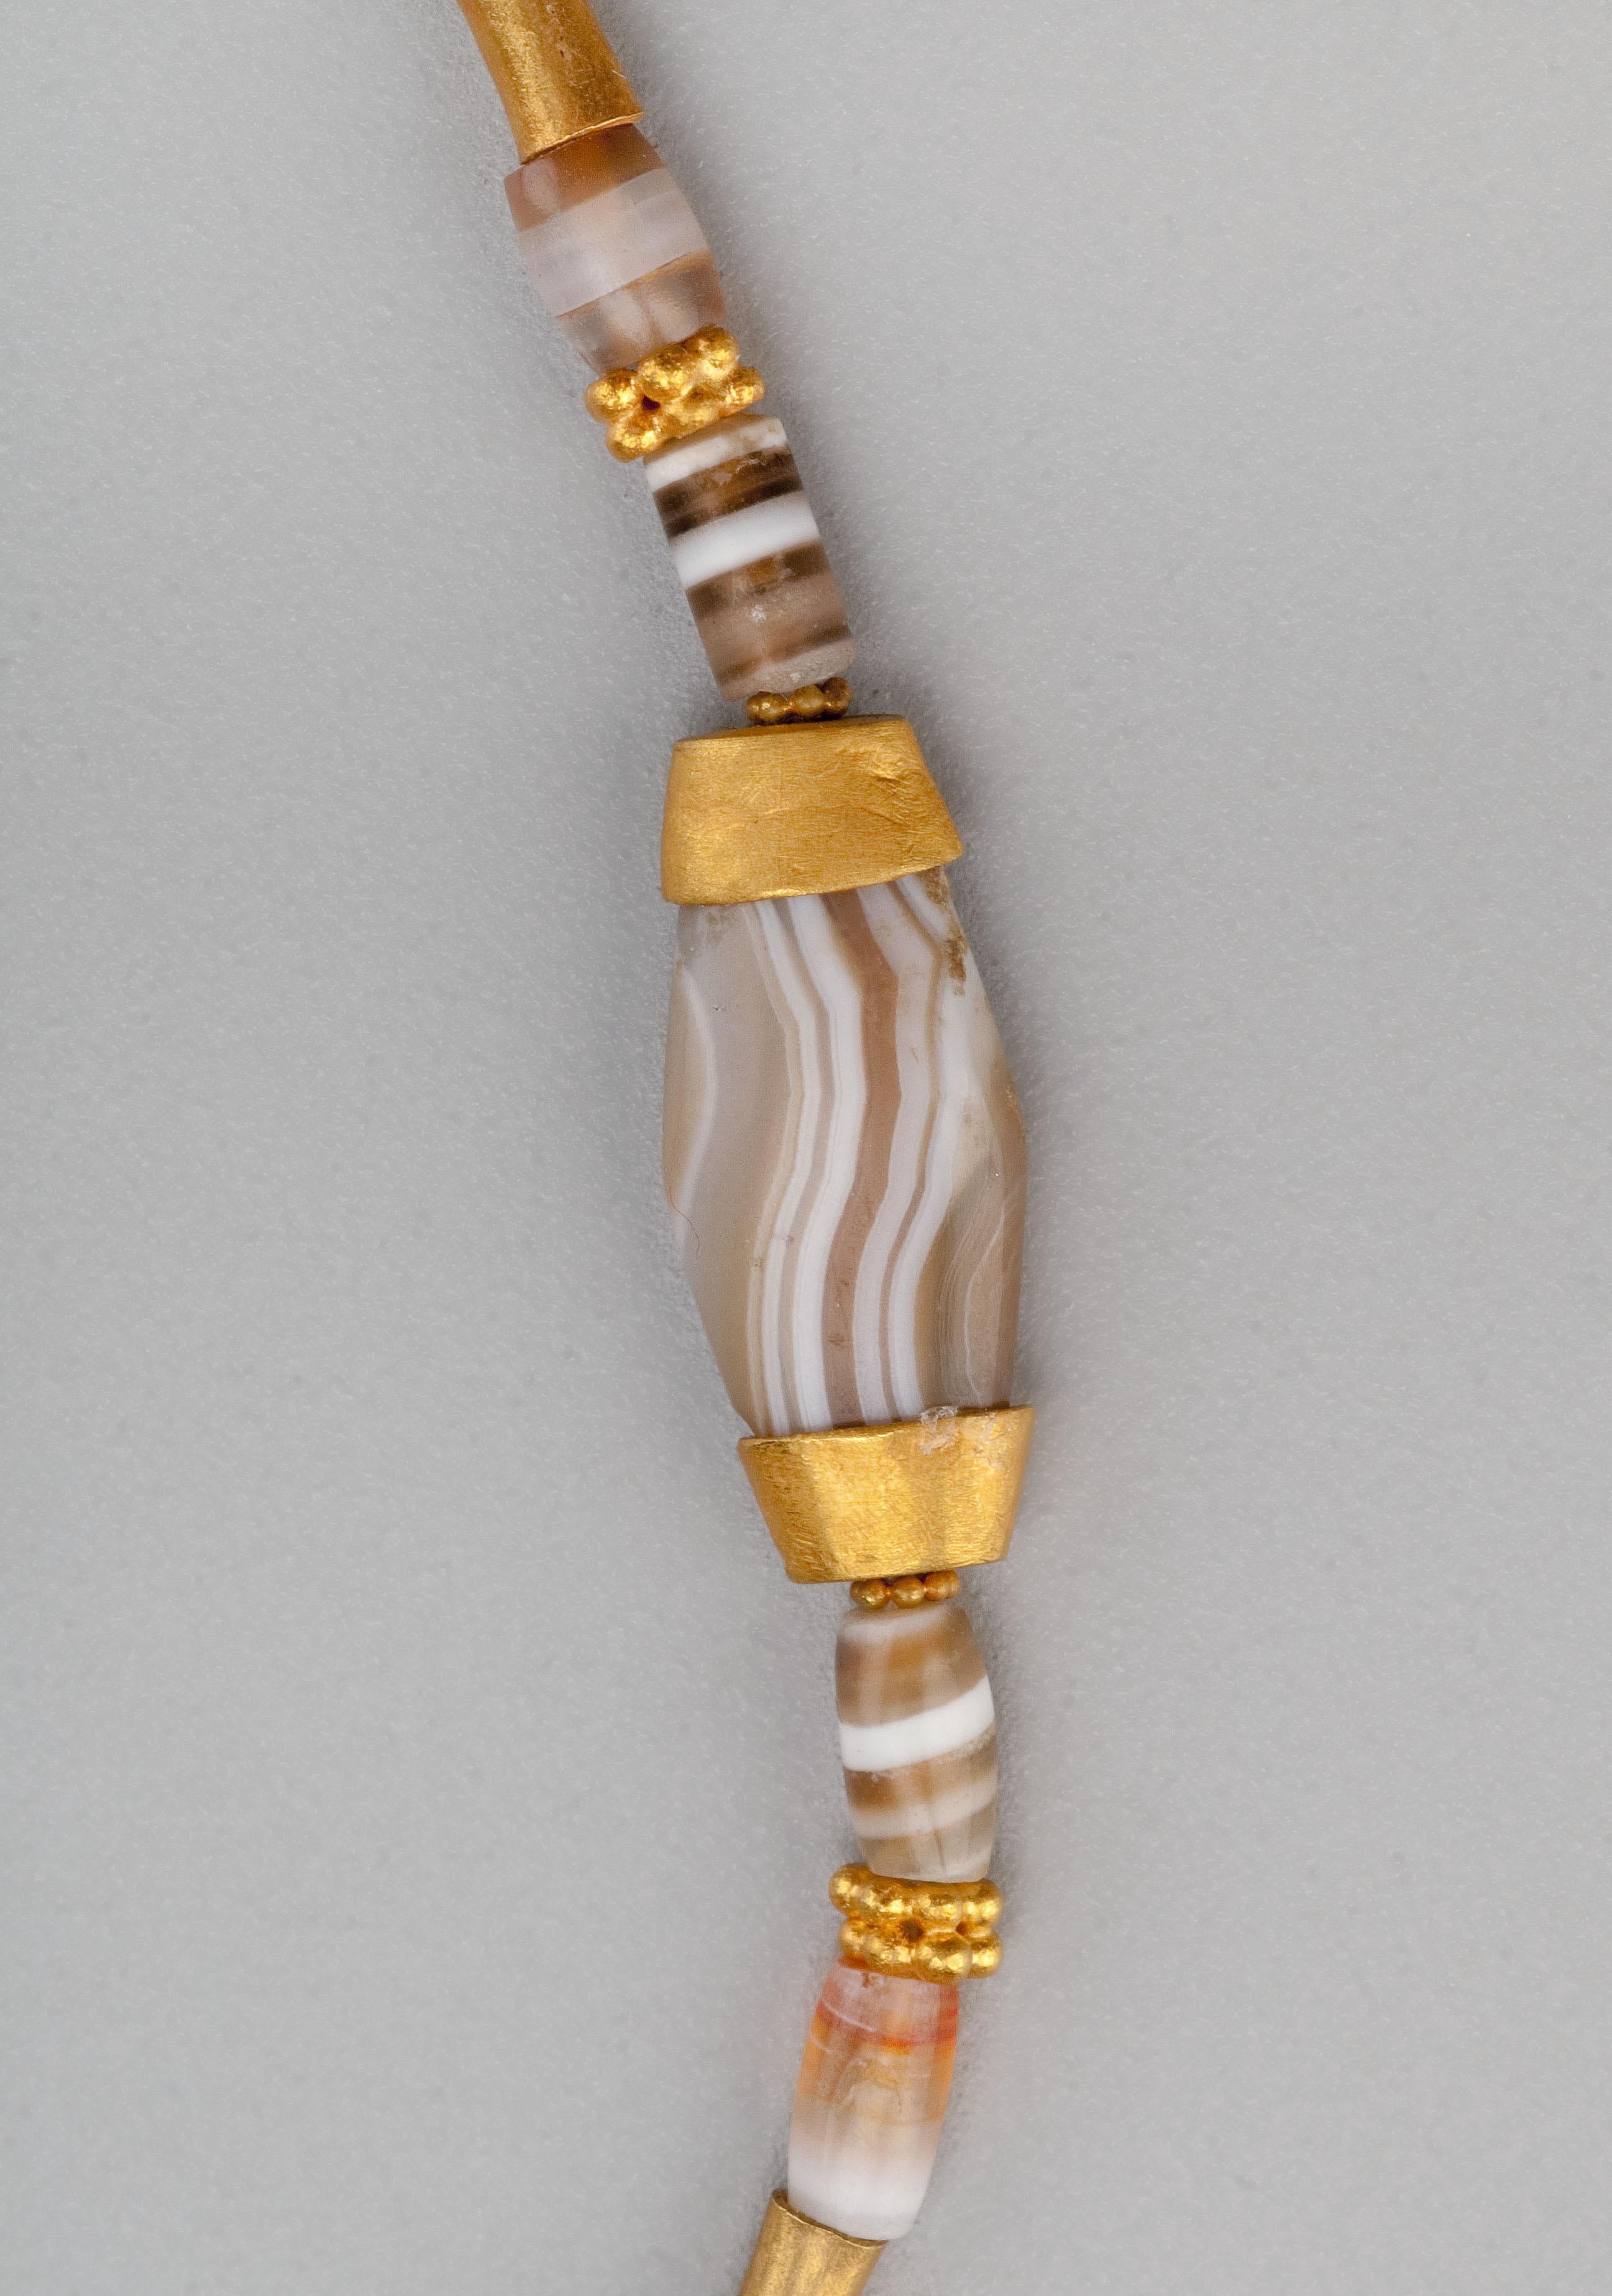 Ensemble of Ancient Agate Bead Necklaces, 22k Granulated Gold Beads, and Clasp In Good Condition For Sale In Bloomington, IN